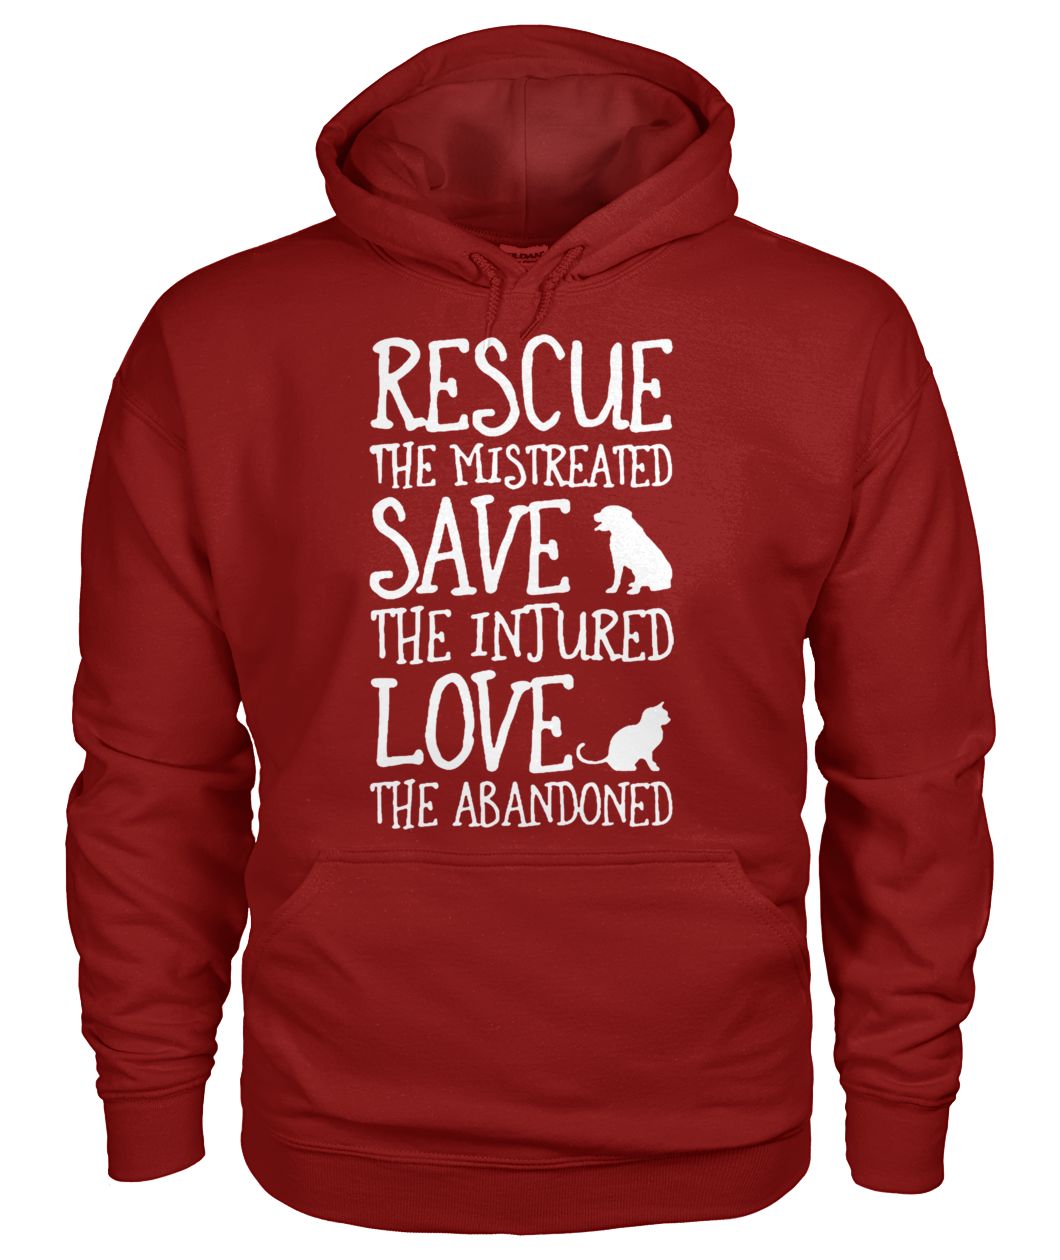 Rescue the mistreated save the injured love the abandoned gildan hoodie